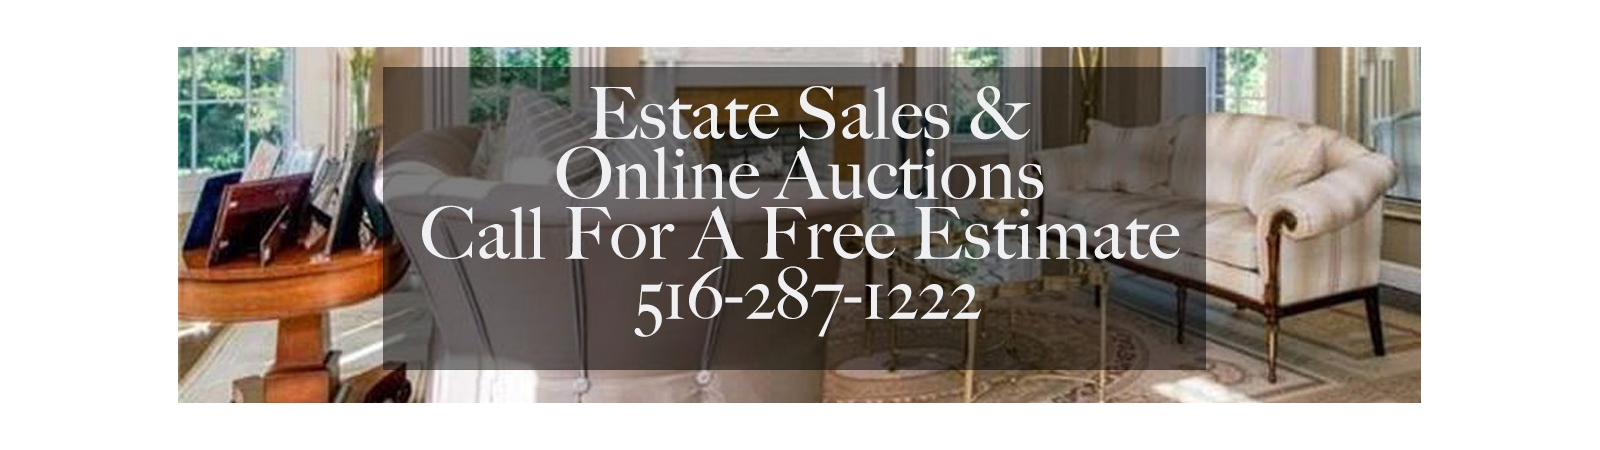 Sisters In Charge Estate Sales | Auction Ninja